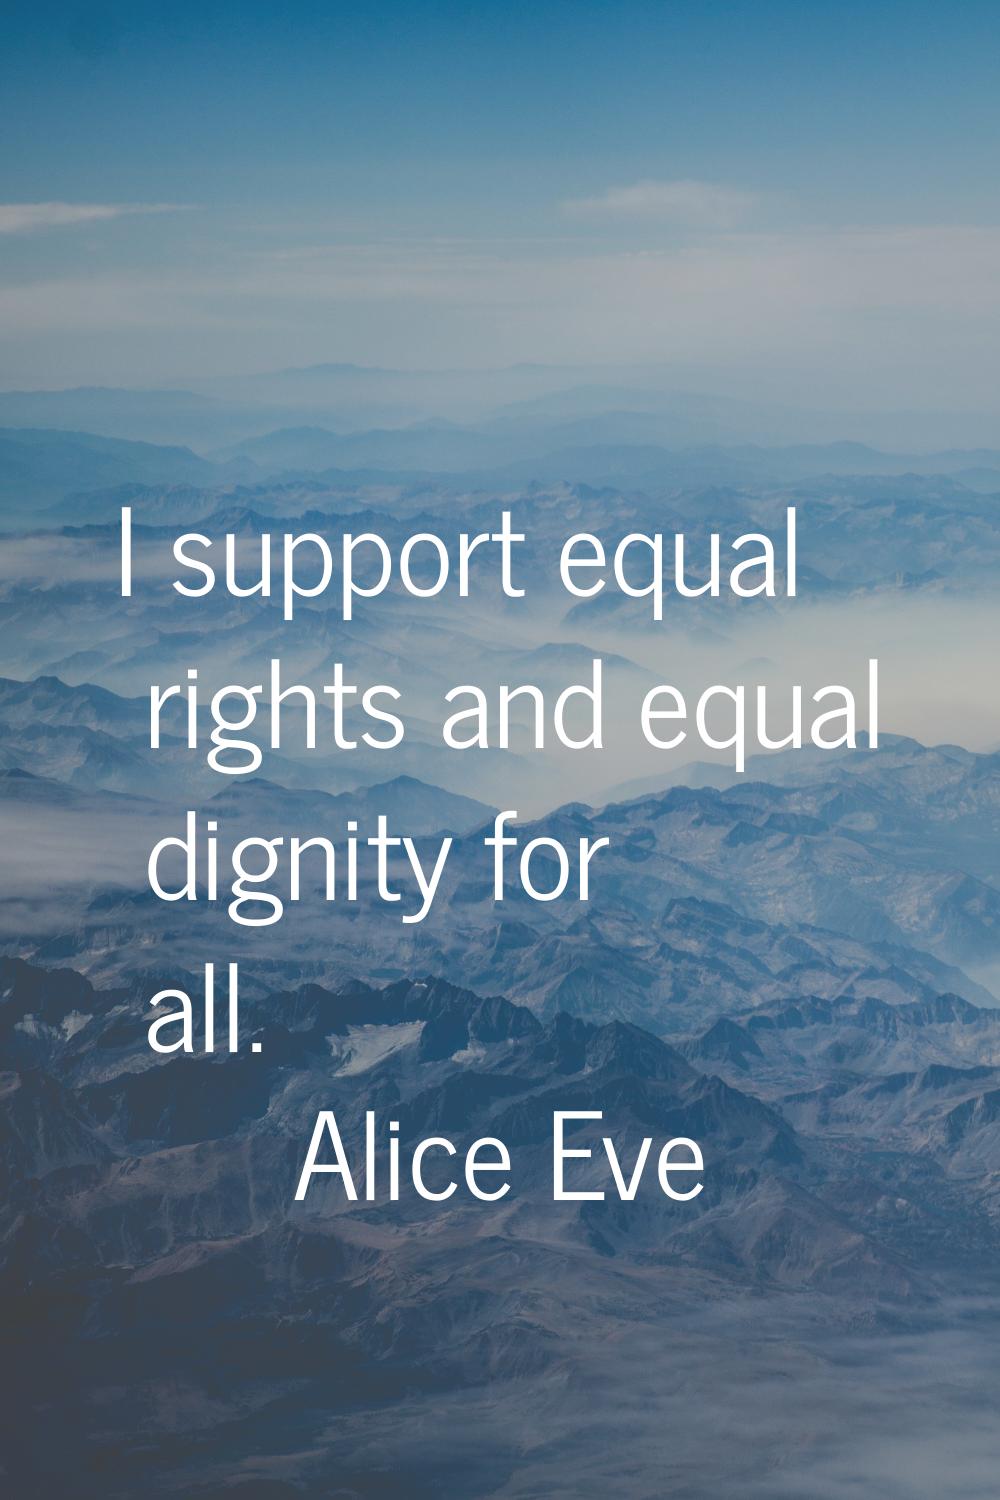 I support equal rights and equal dignity for all.